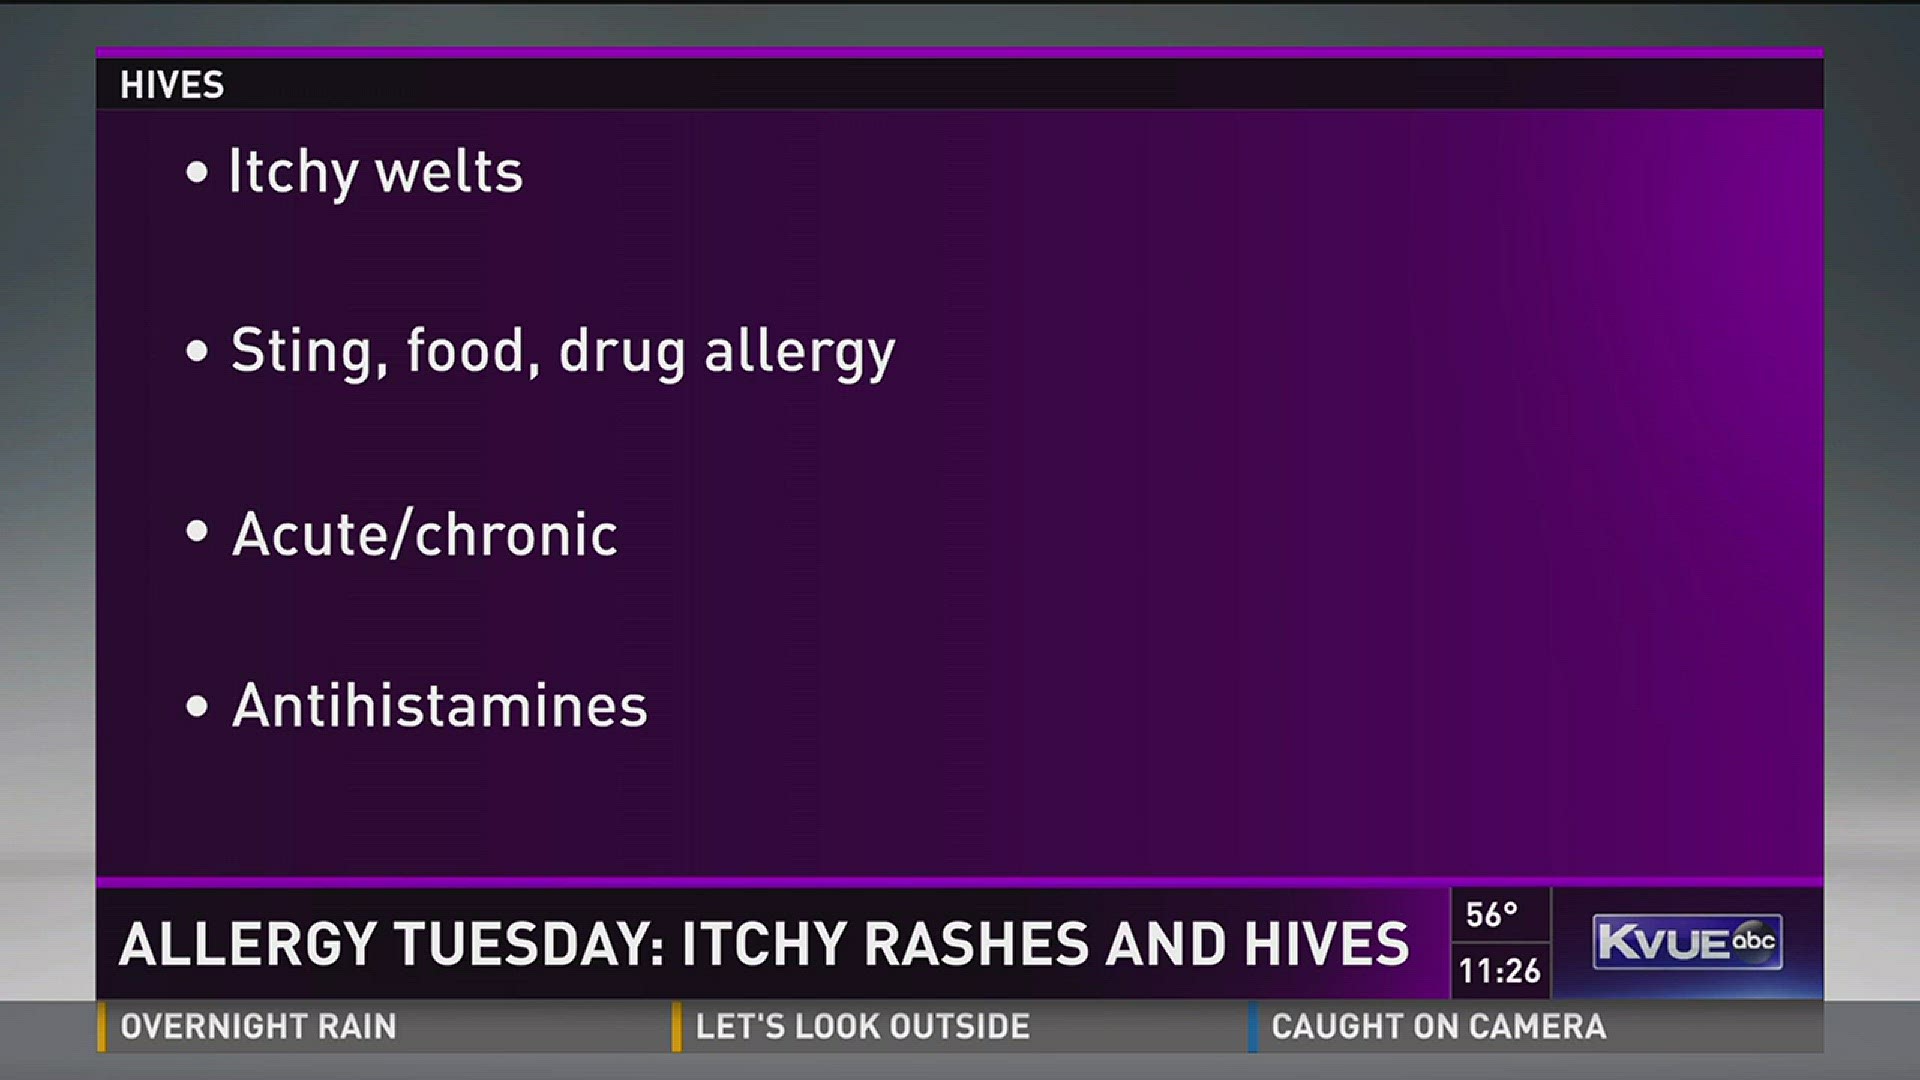 Allergy Tuesday: Treatment for hives